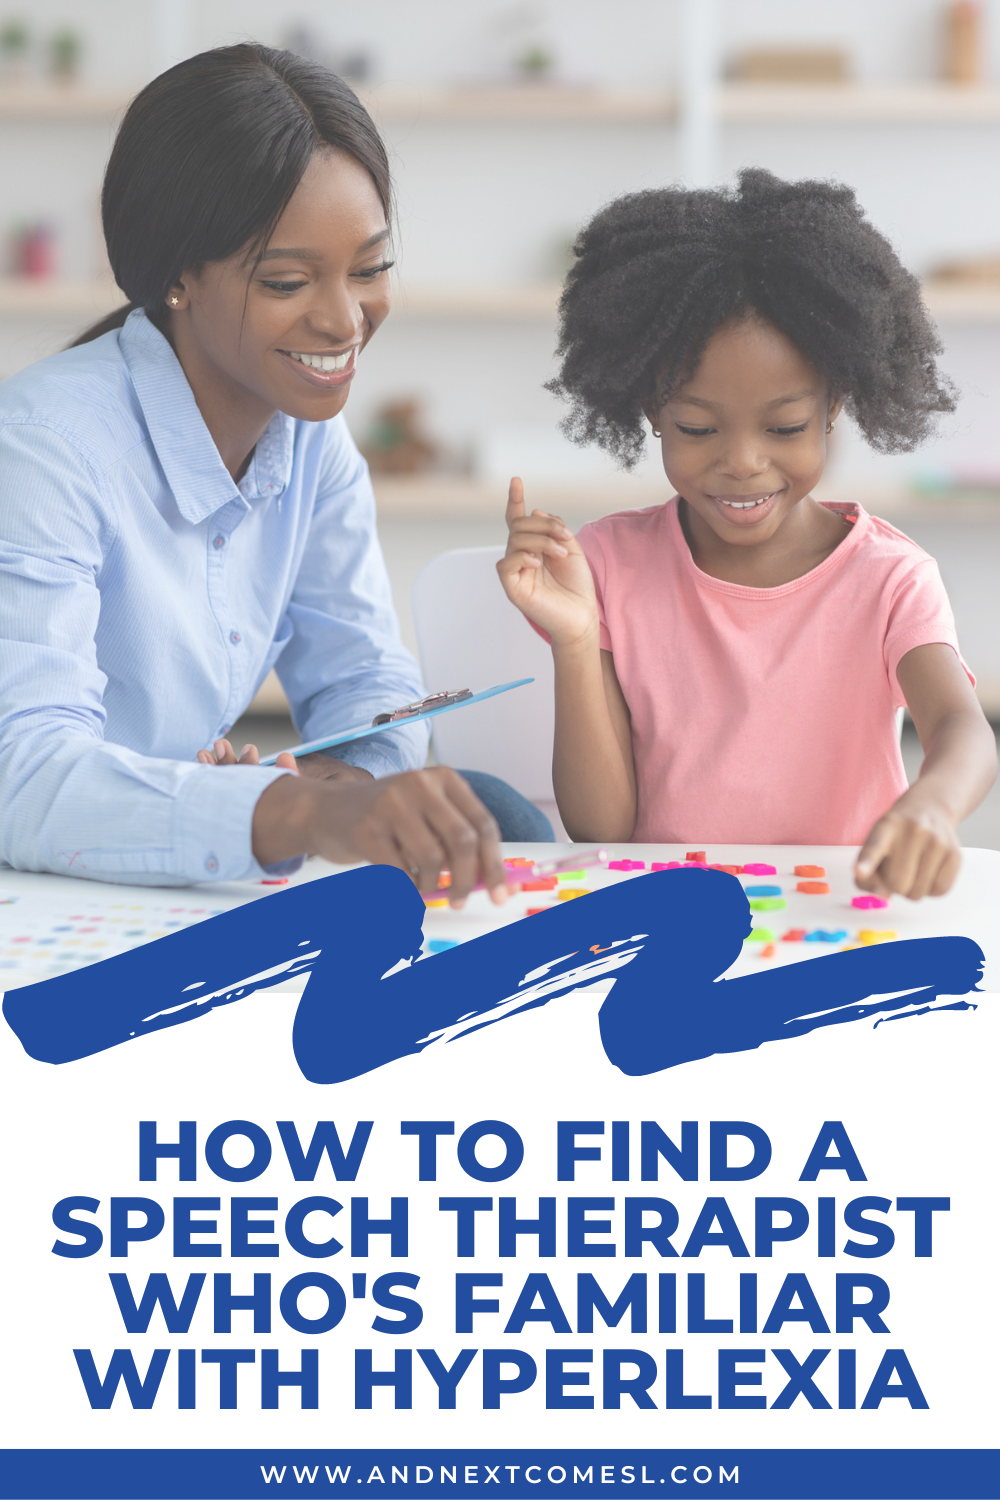 How to find a speech therapist specializing in hyperlexia